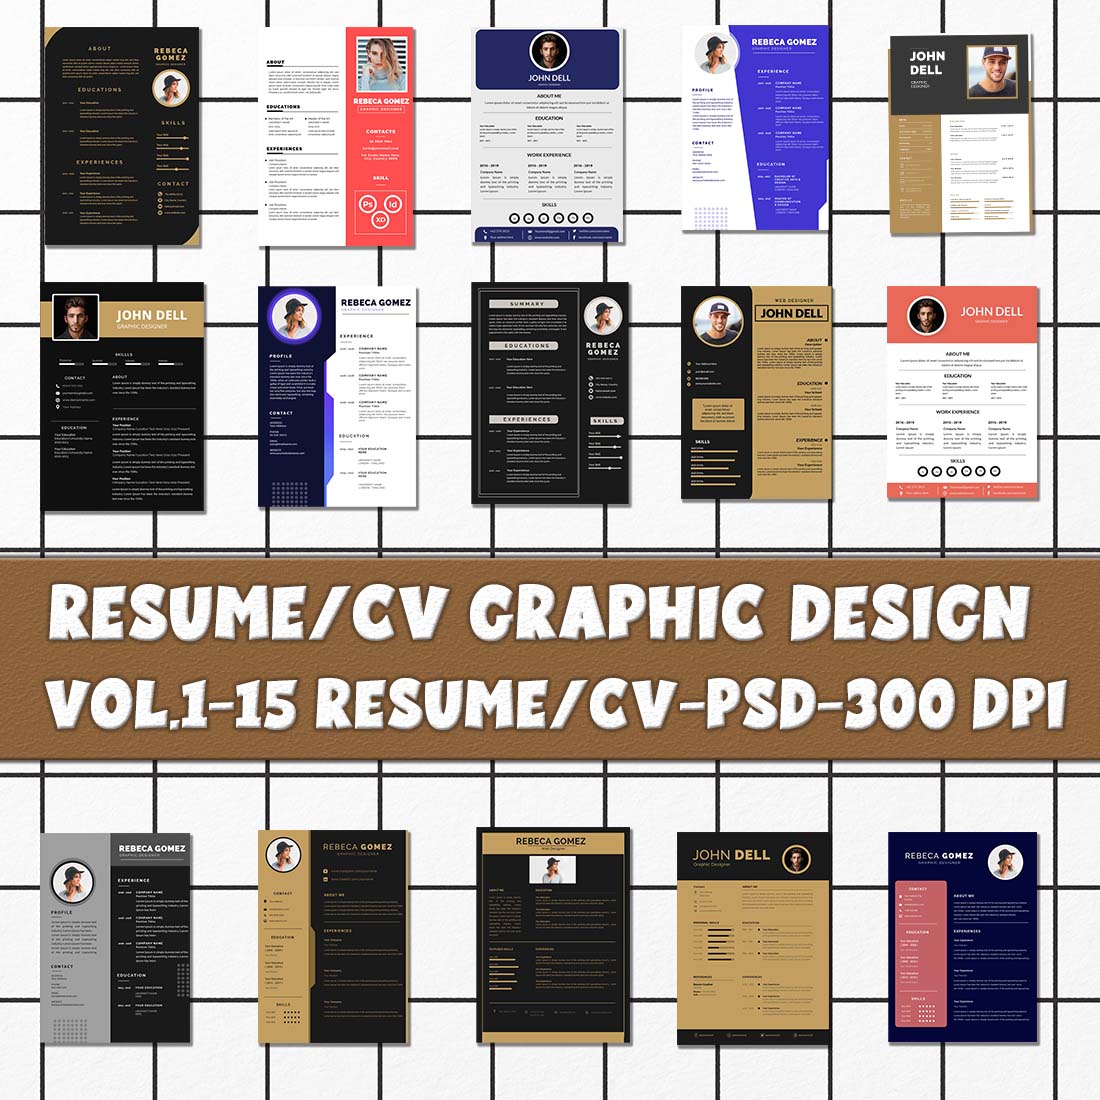 Poster with a bunch of different resumes on it by Dionisius.